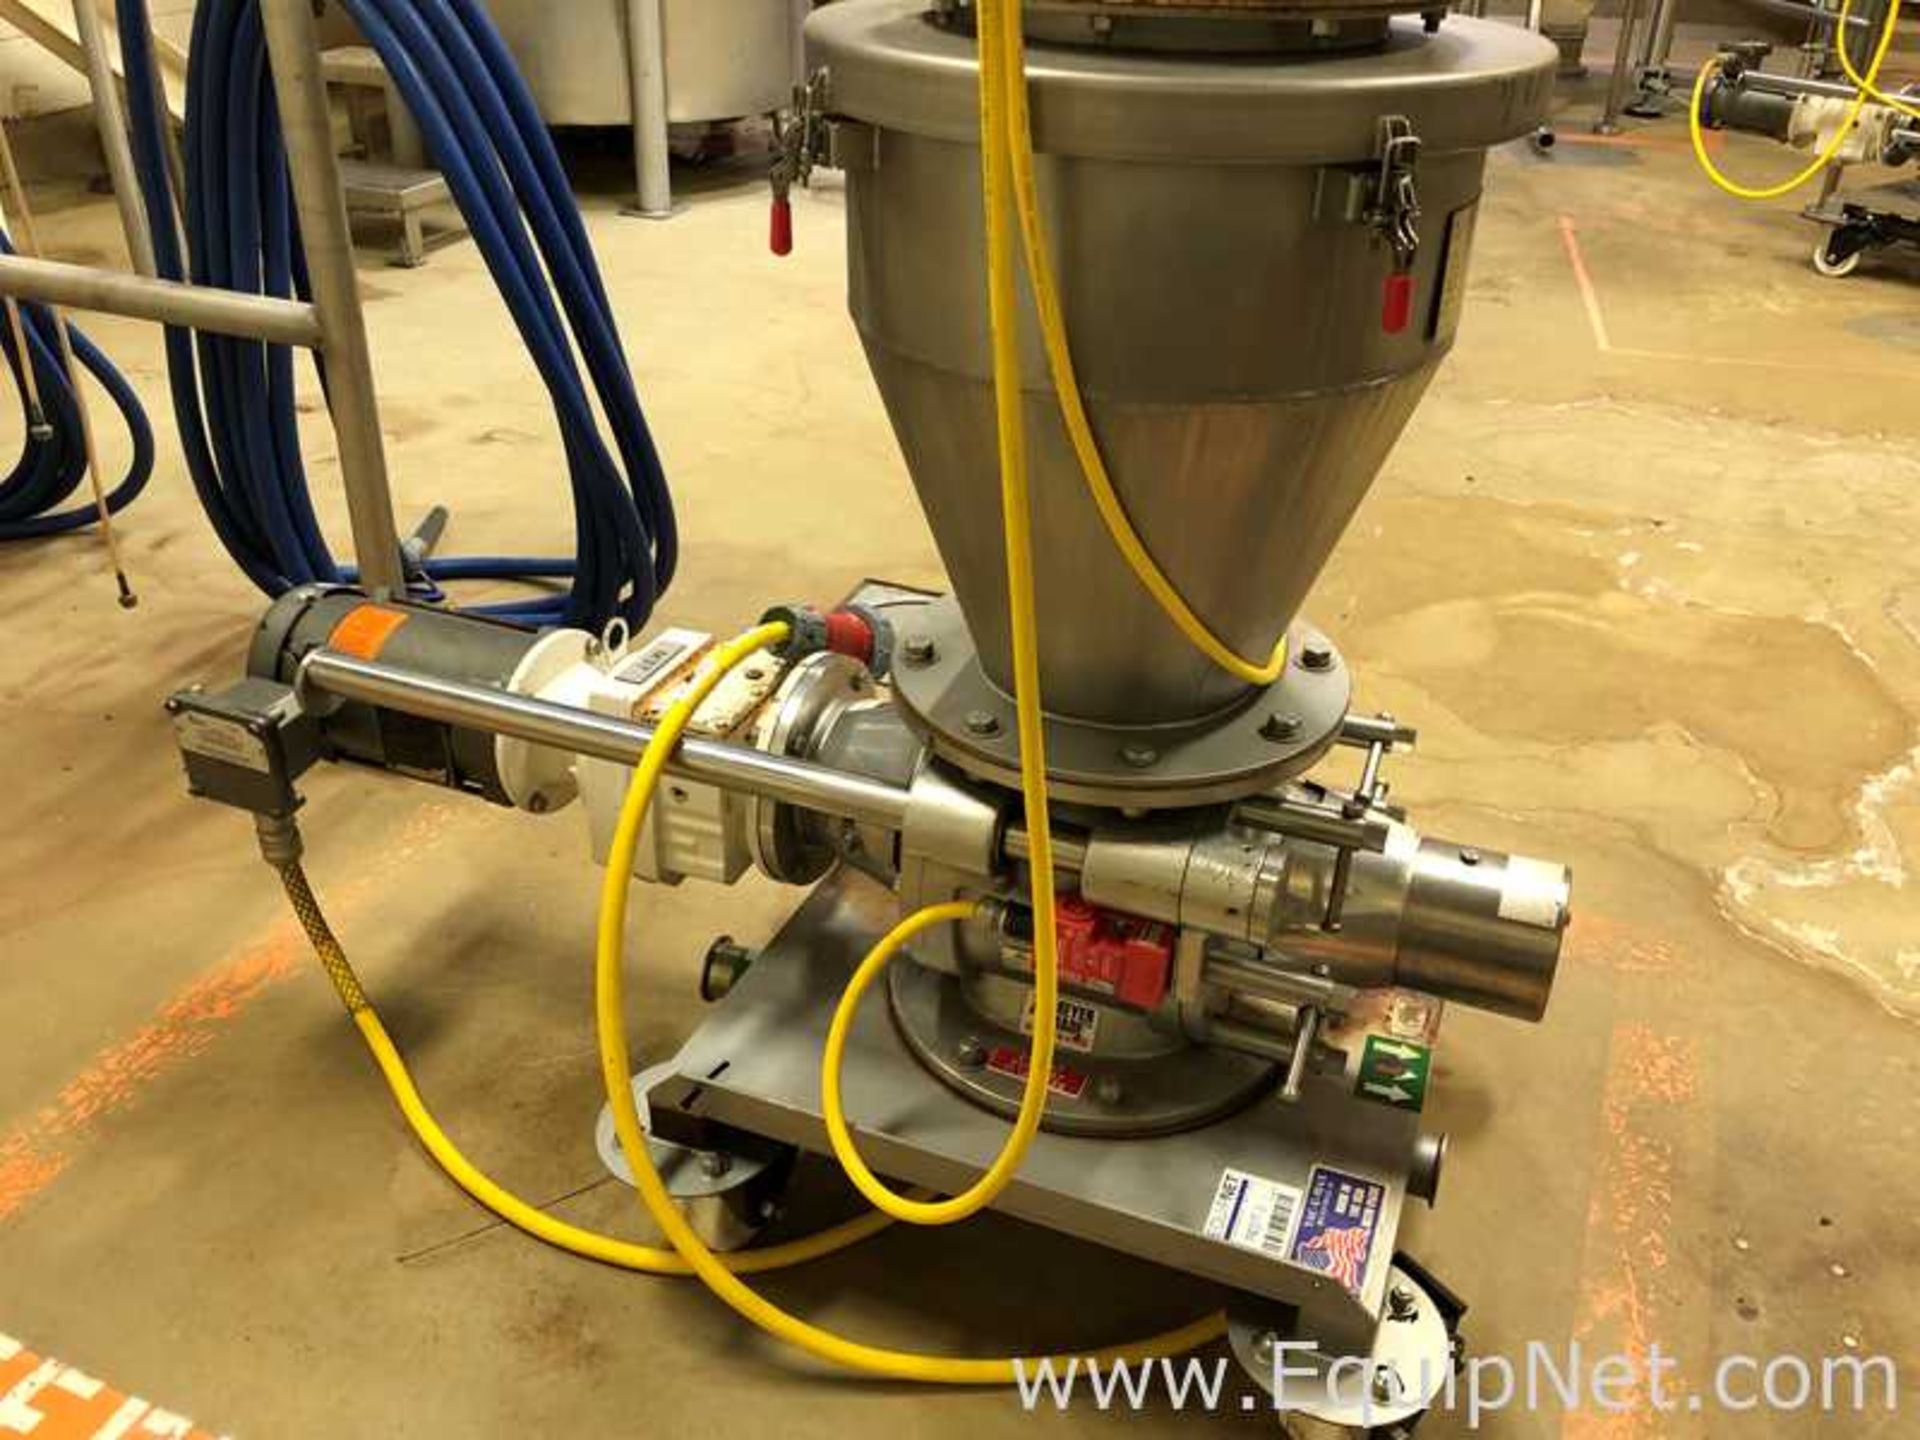 One Vacuum Conveyor System Vac-U-Max With Hopper And One Rotary Valve - Image 6 of 9